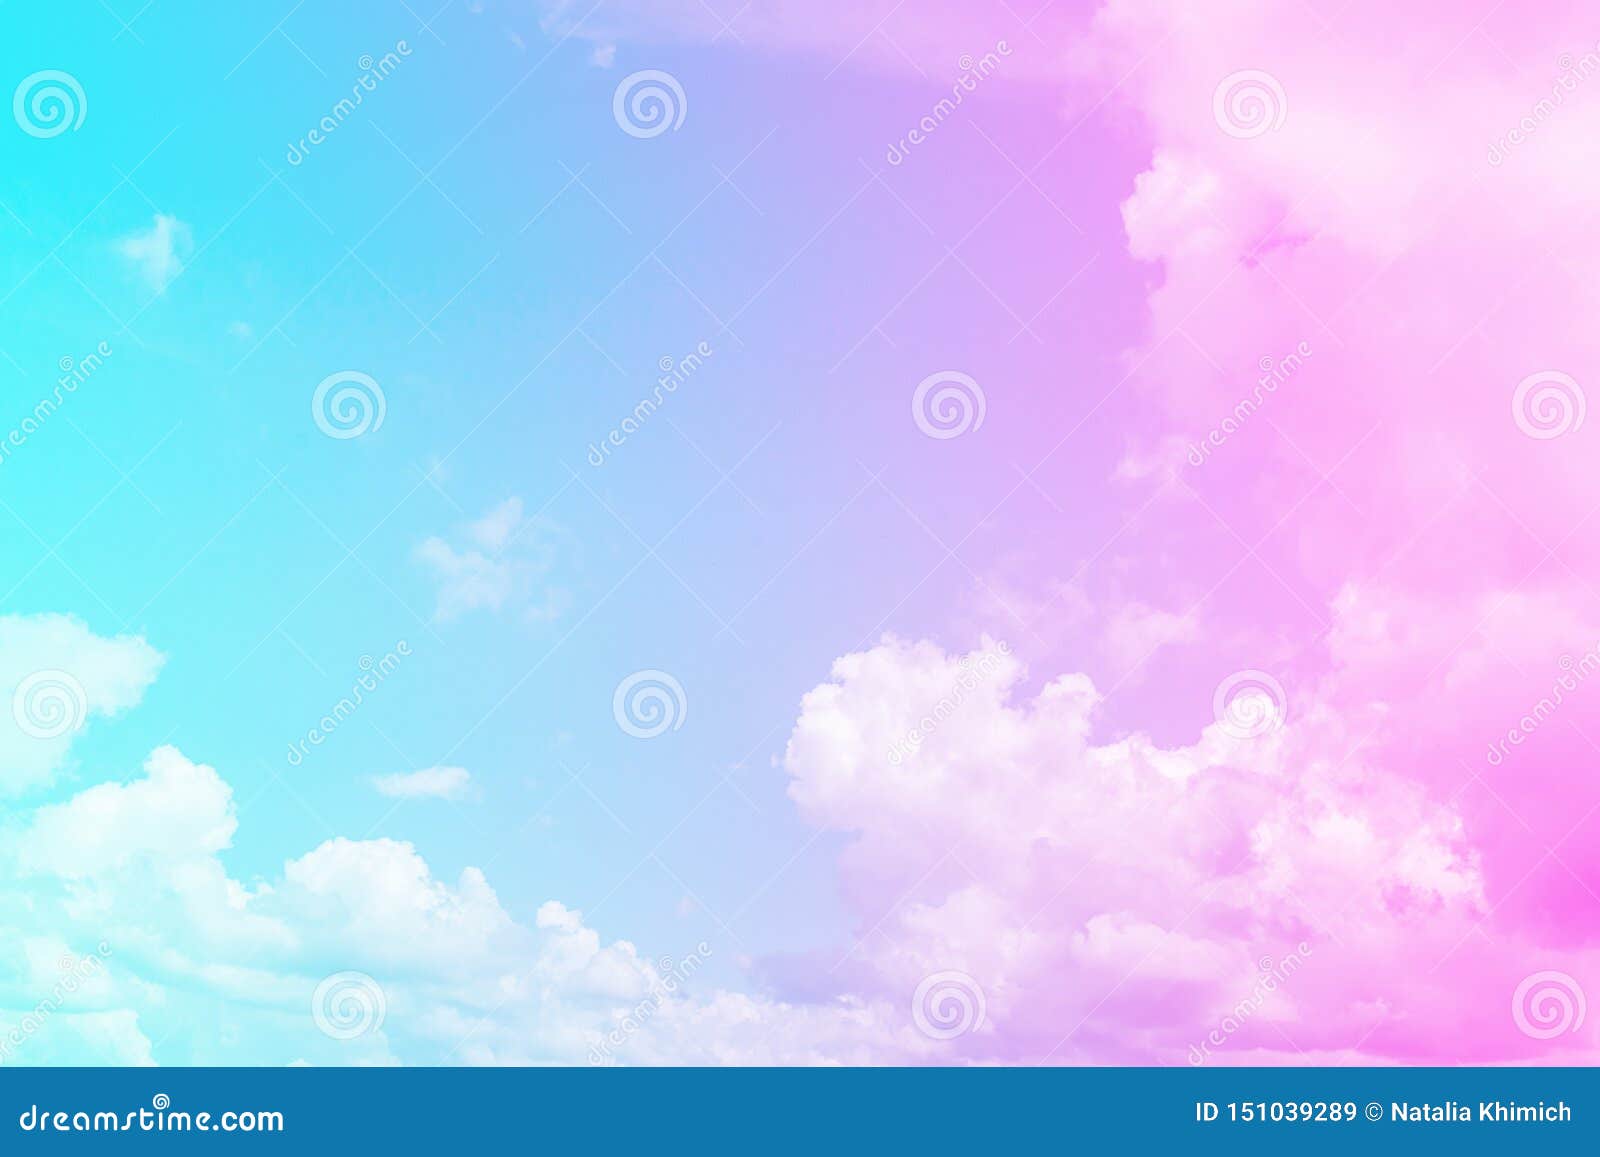 Watercolor Liquid Sky Blue Background Texture Cerulean Blue Color  Backdrop Stains on Paper Hand Painted Stock Photo  Image of cerulean  abstract 196017666